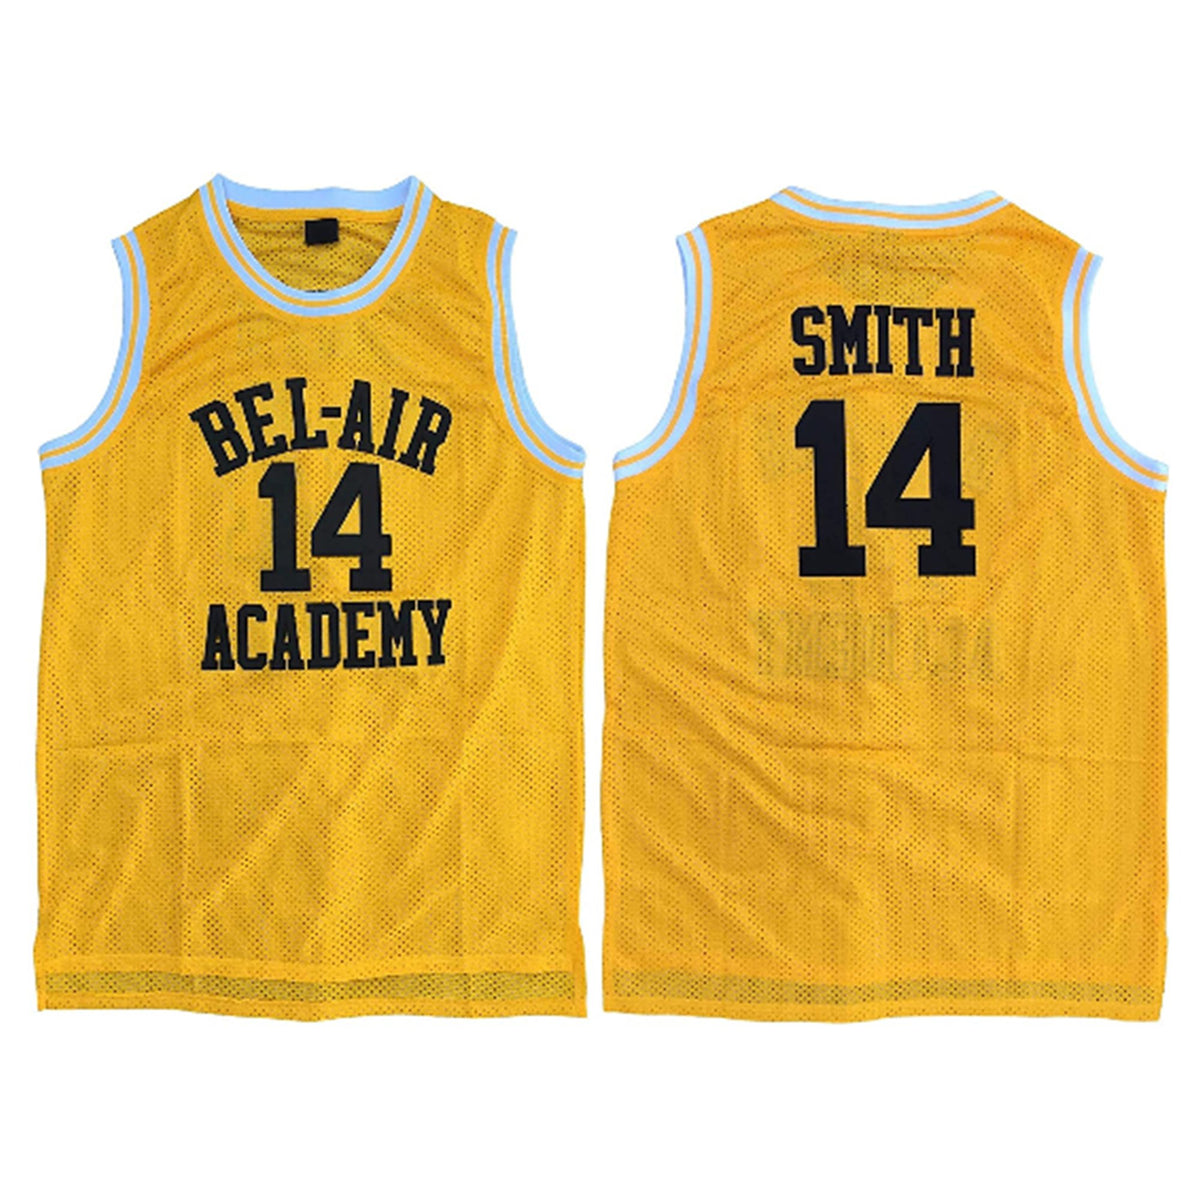 Impress Fellow 90s Kids With This Fresh Prince Basketball Jersey